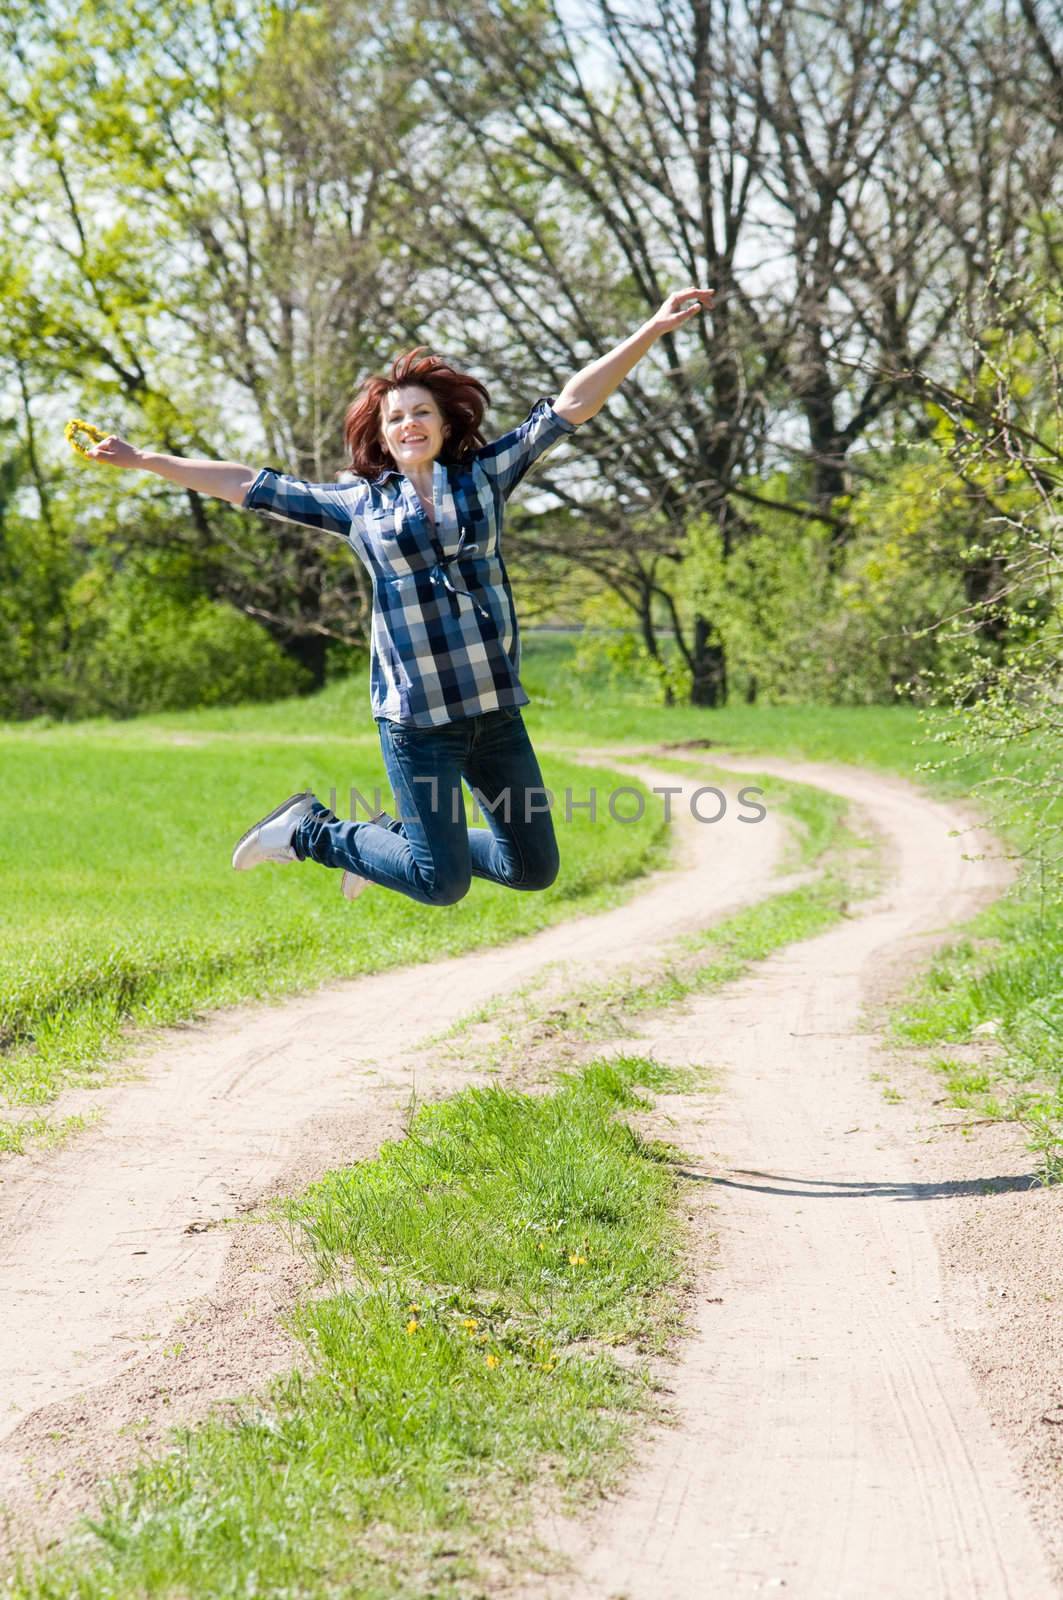 The happy woman has jumped up over road